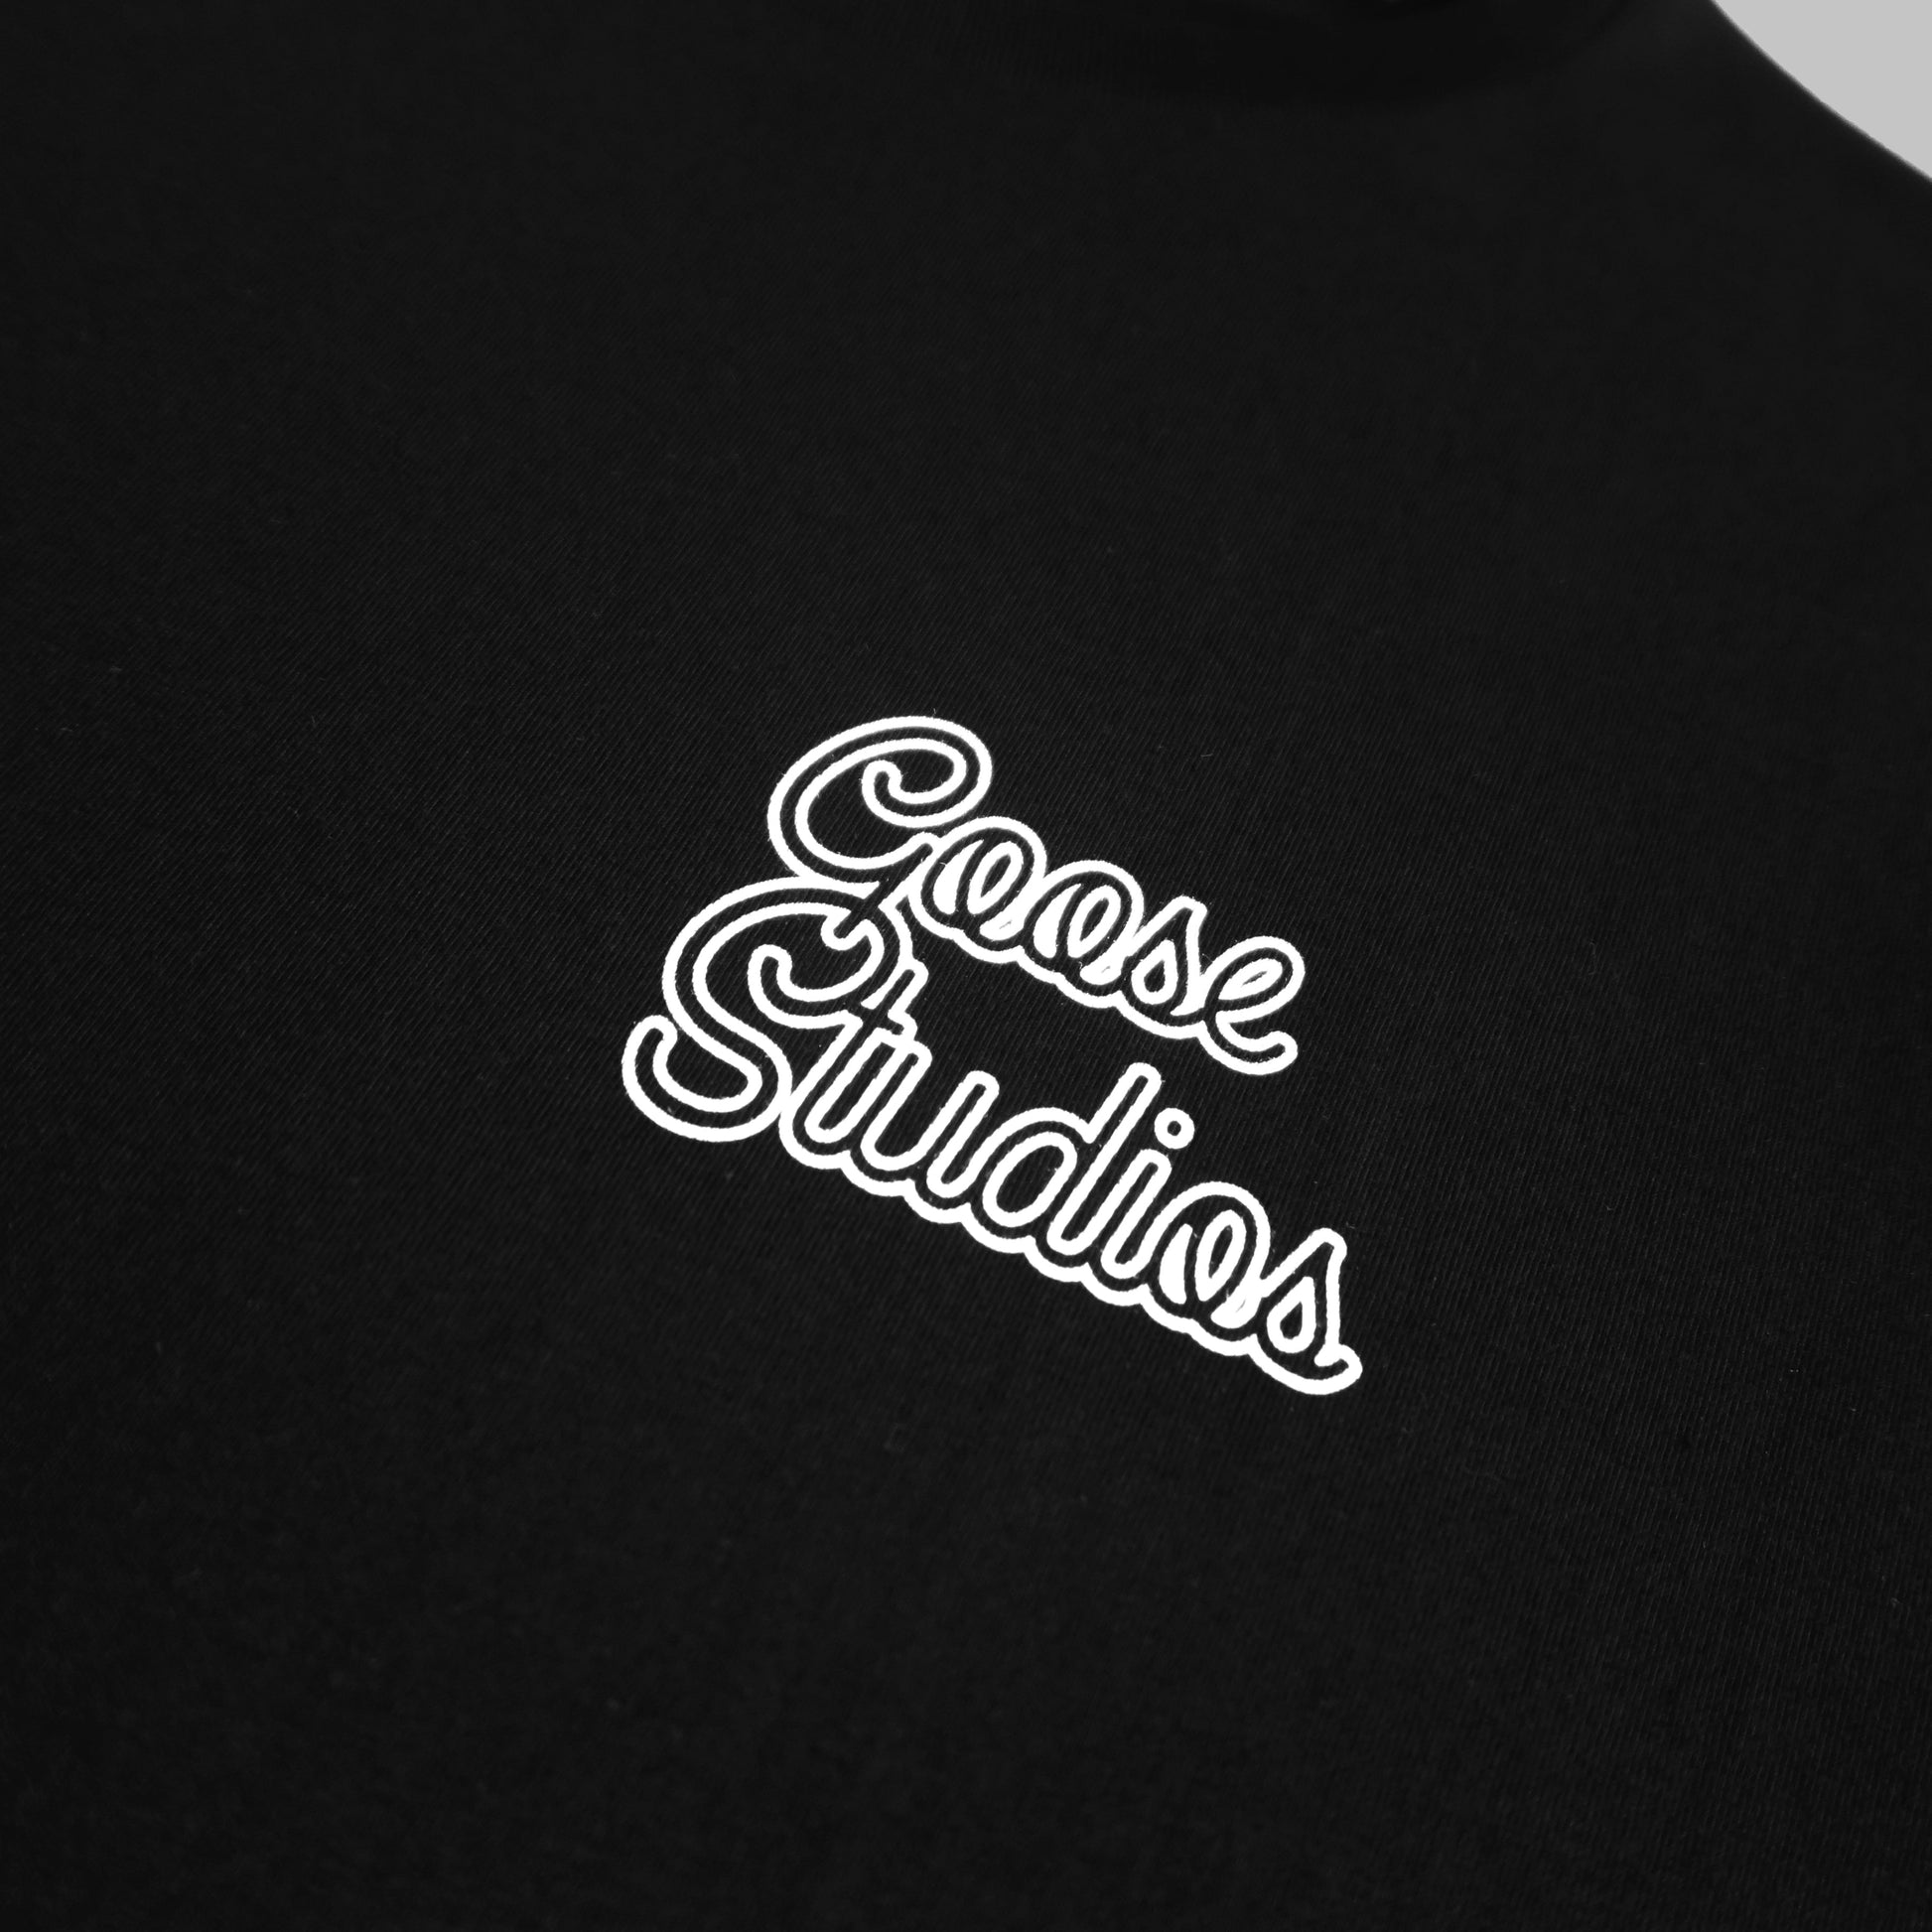 Close up of front of Black organic cotton T Shirt with white printed logo